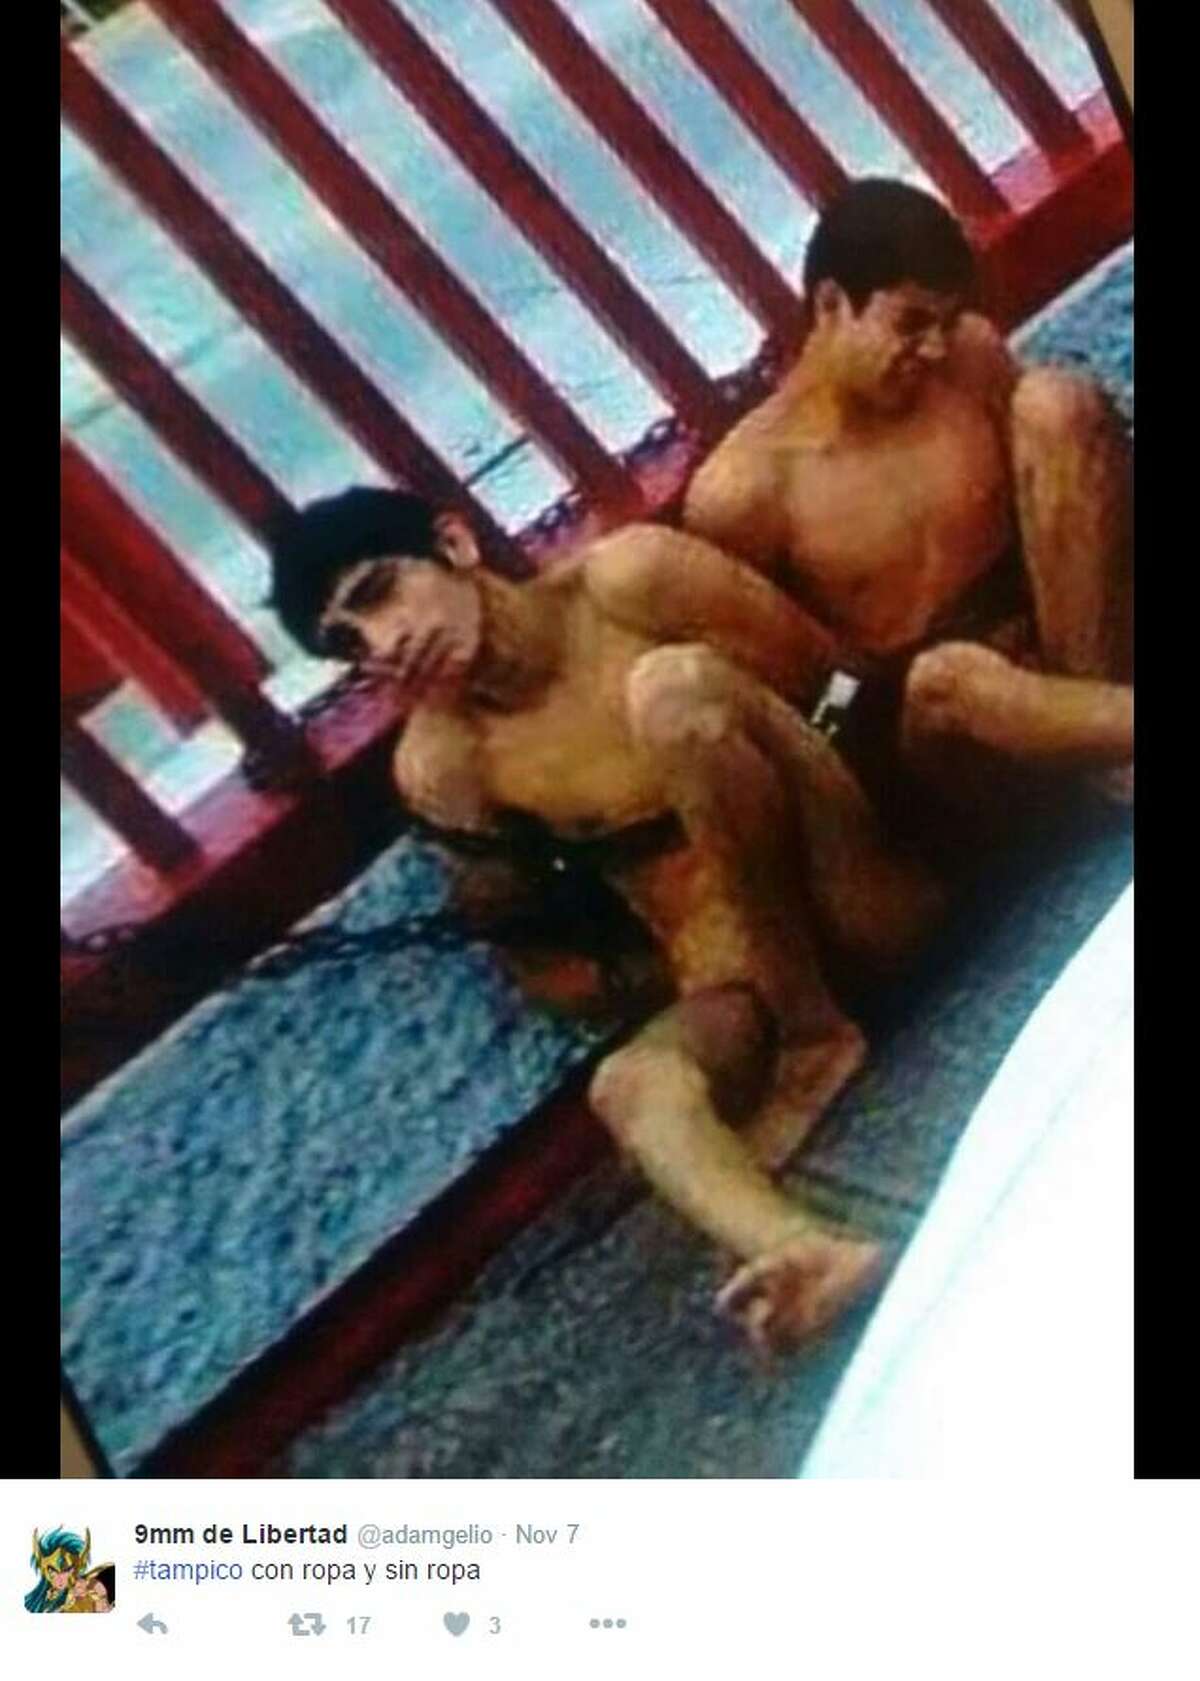 Members of the Gulf Cartel apparently tied up two men and left them naked after the two men allegedly committed a series of thefts and robberies in Tampico and the surrounding region.